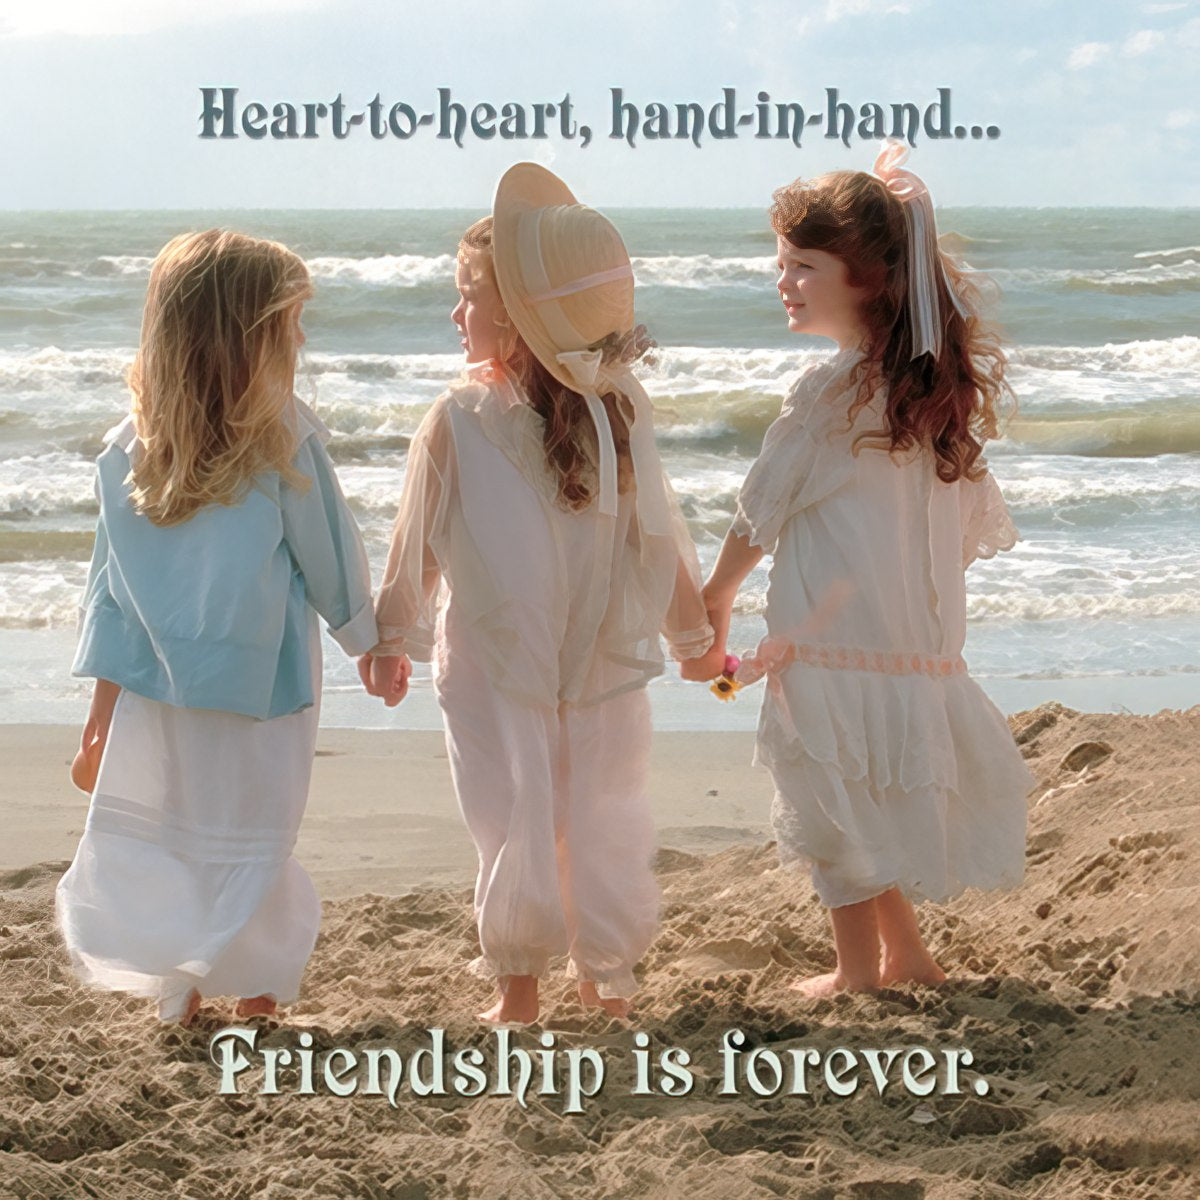 Friendship is Forever